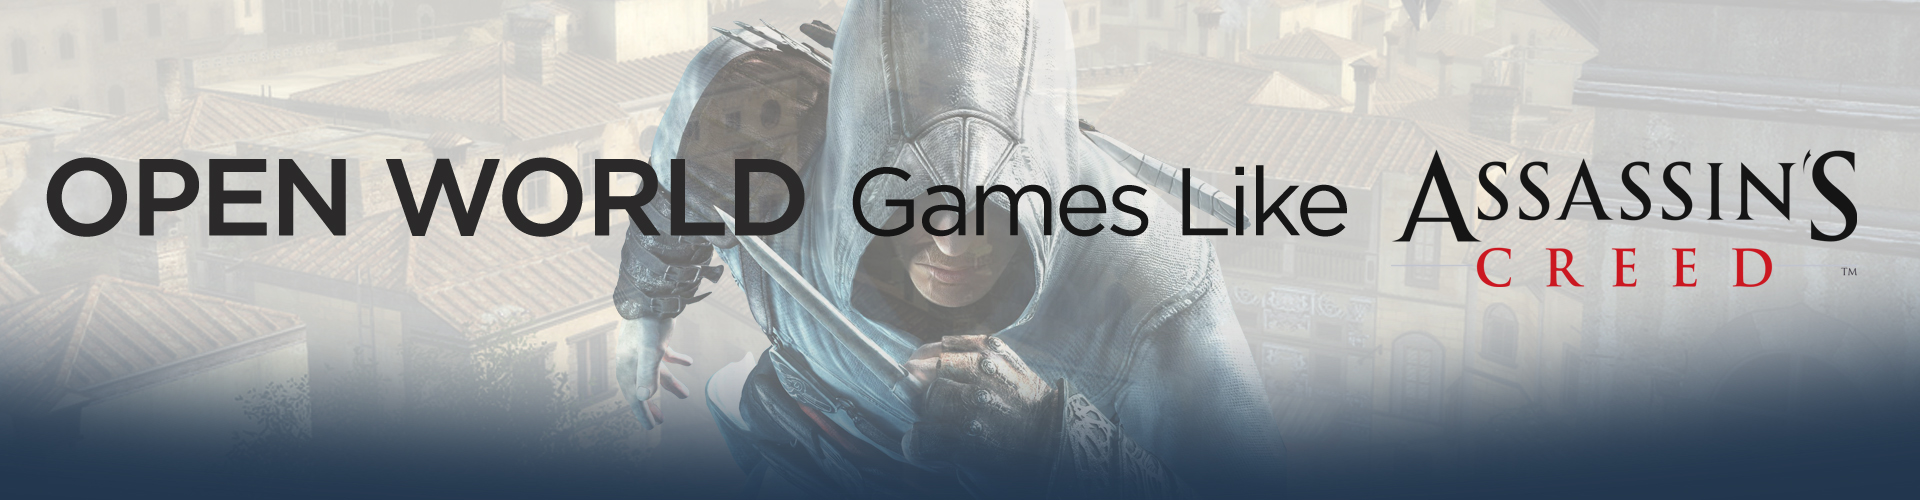 Open World Games like Assassin's Creed